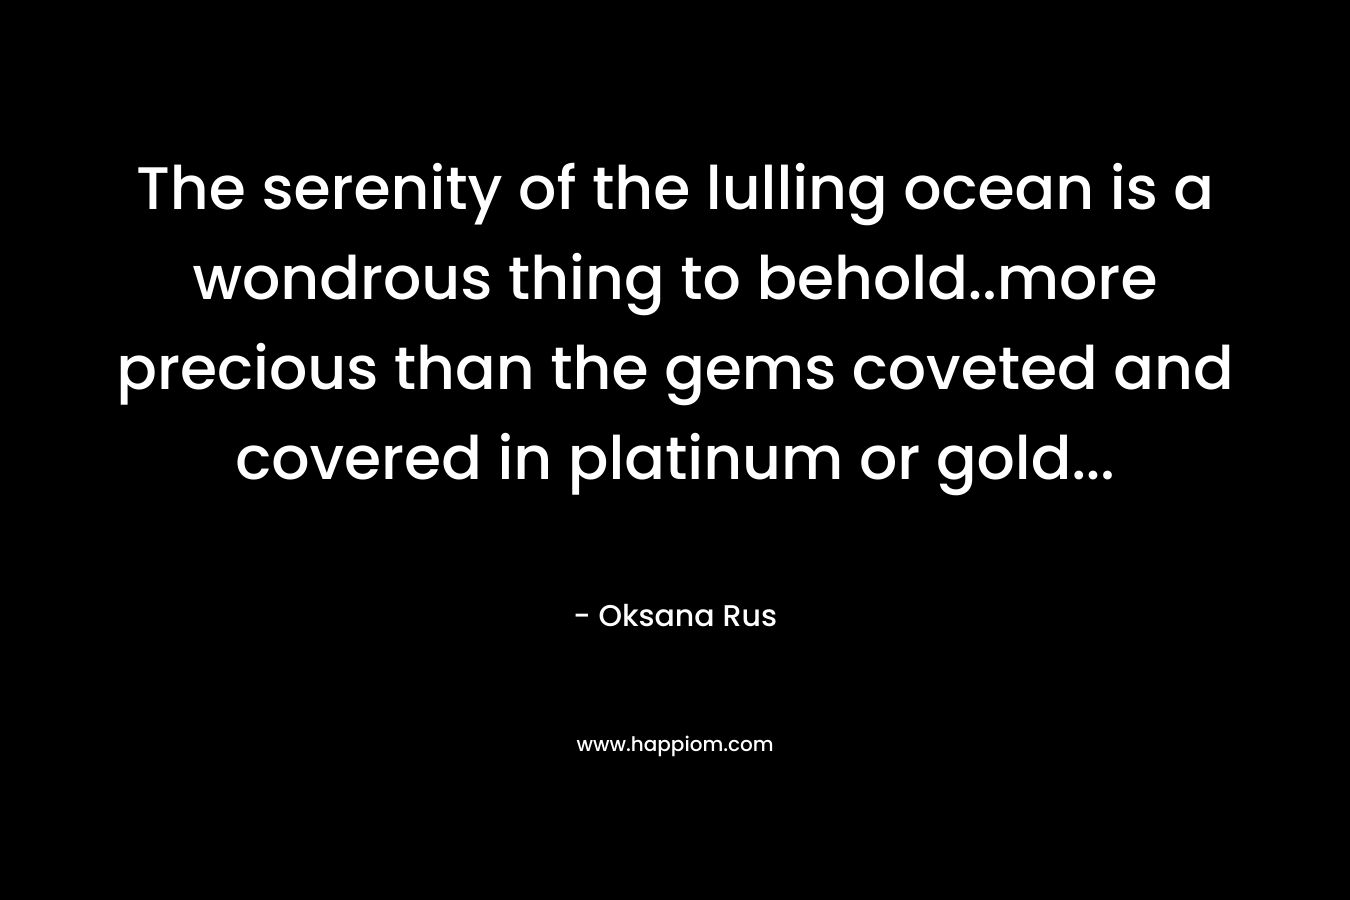 The serenity of the lulling ocean is a wondrous thing to behold..more precious than the gems coveted and covered in platinum or gold...